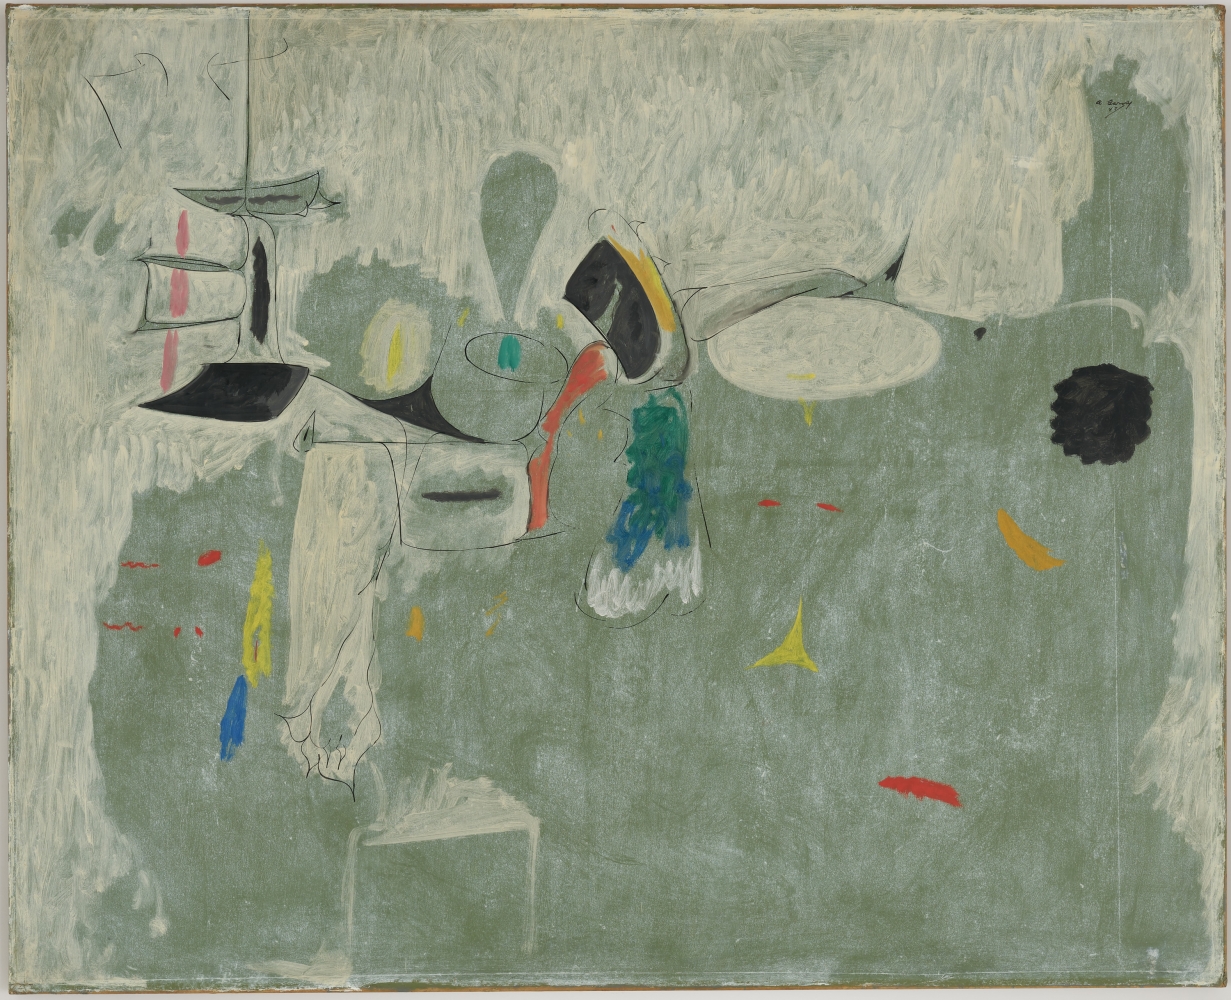 The Limit,&nbsp;1947, oil on paper mounted on canvas,&nbsp;50 3/4 x 62 in. (128.9 x 157.5 cm). Private collection.&nbsp;[AGCR: P318]